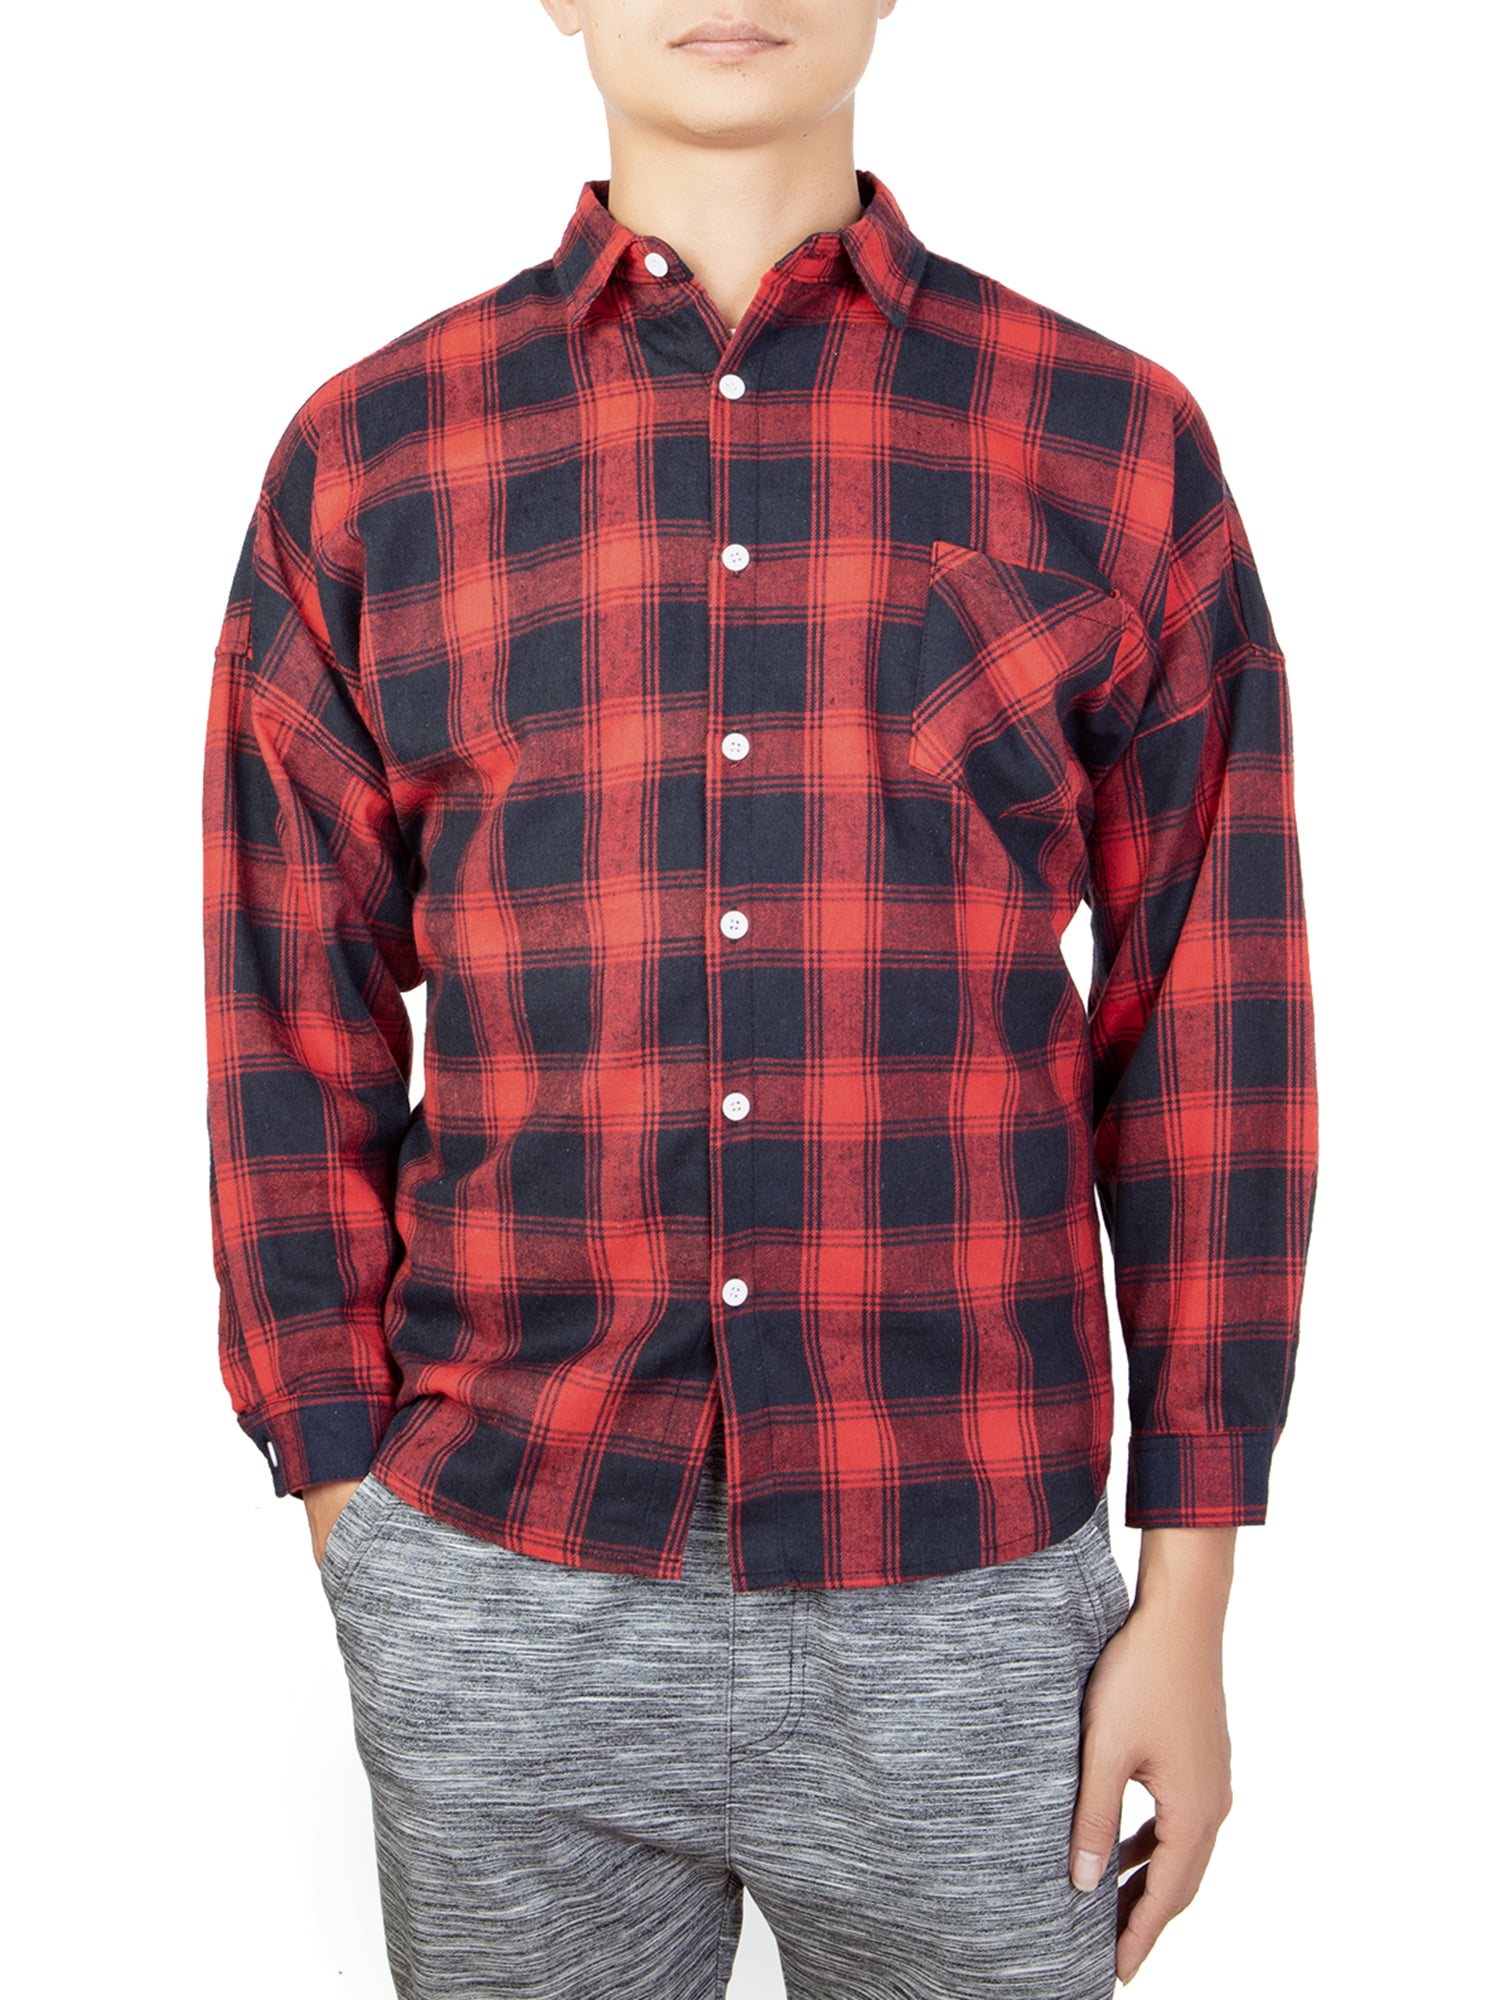 FANNYC Mens Plaid Shirt Long Sleeve Button Down Shirt Blouse Tops Workshirt  Relaxed Fit With Pockets,Red/Black 